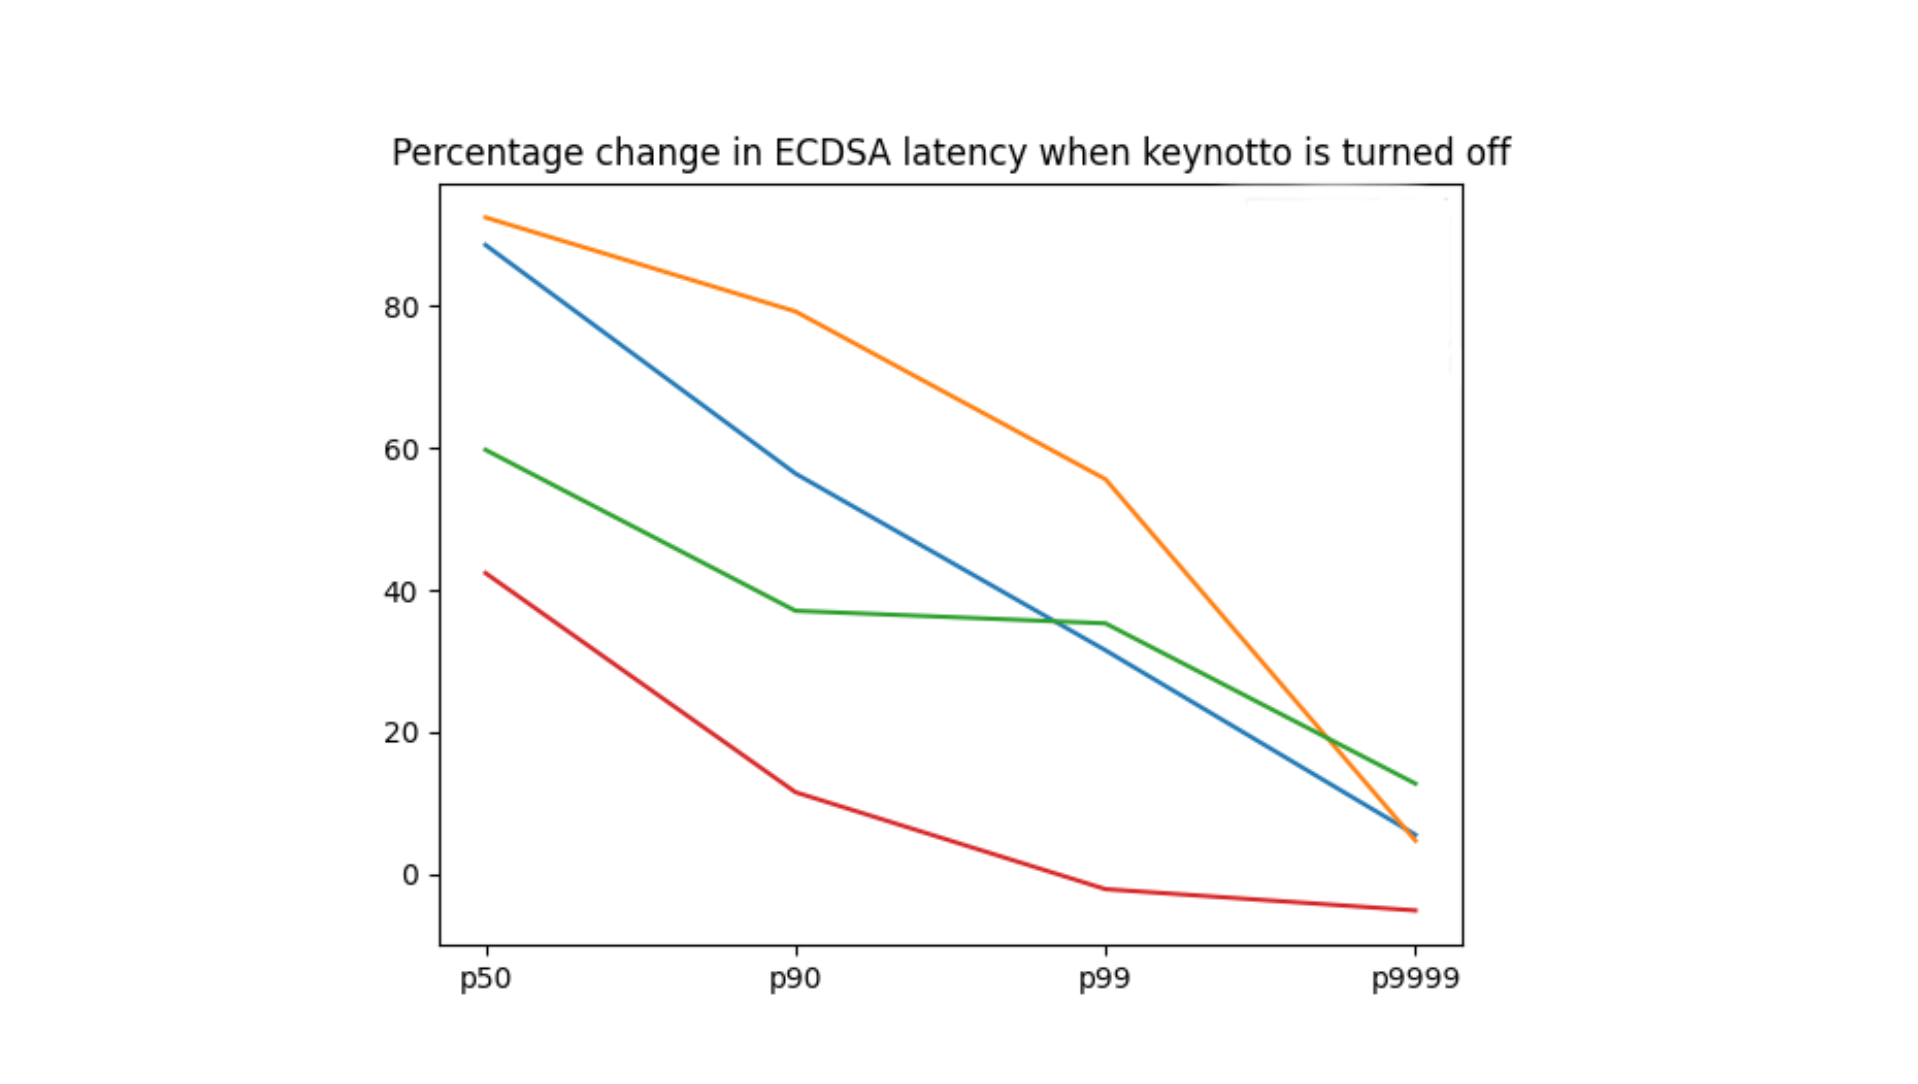 more than 50% increase in latency on average across colos and percentiles